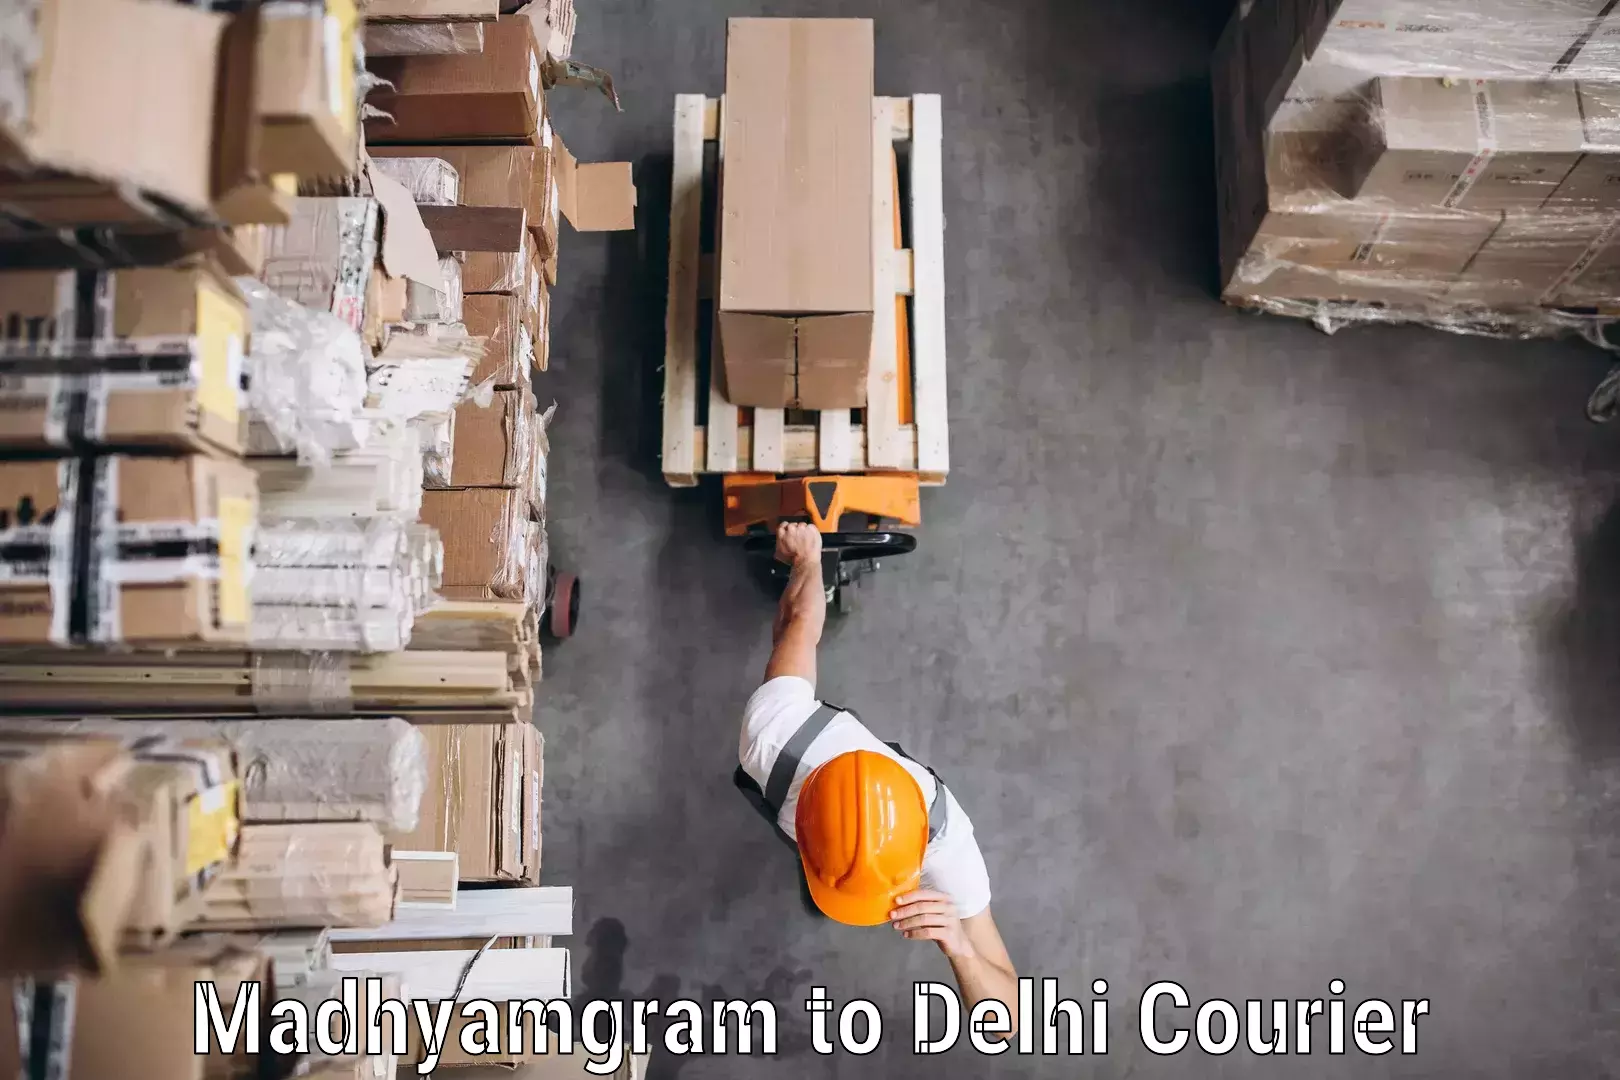 State-of-the-art courier technology Madhyamgram to NCR